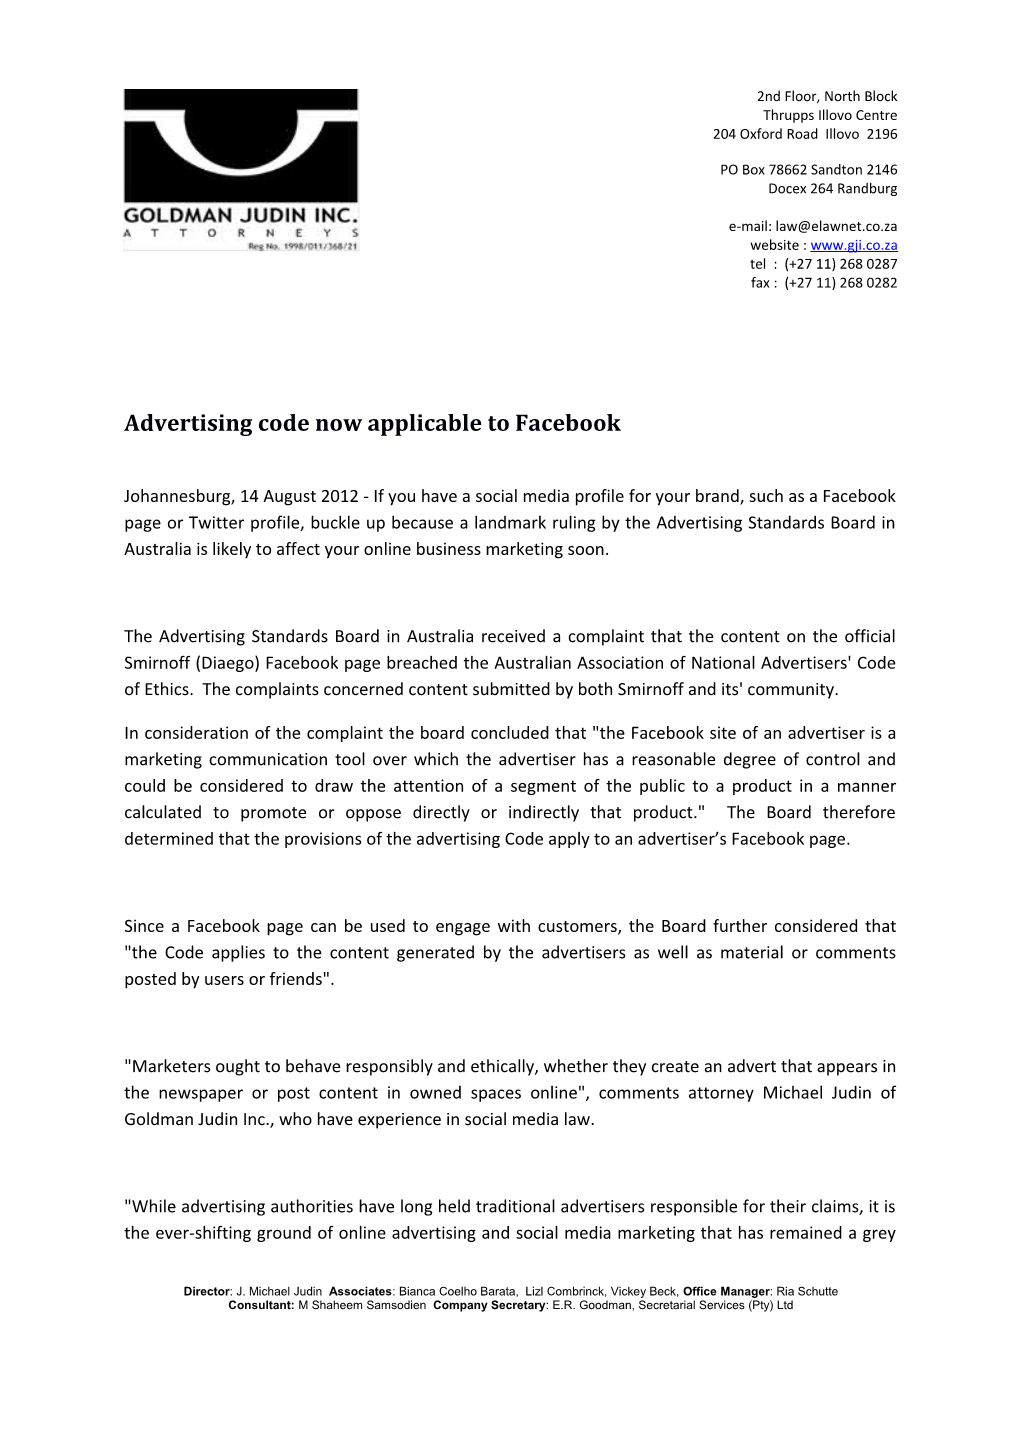 Advertising Code Now Applicable to Facebook